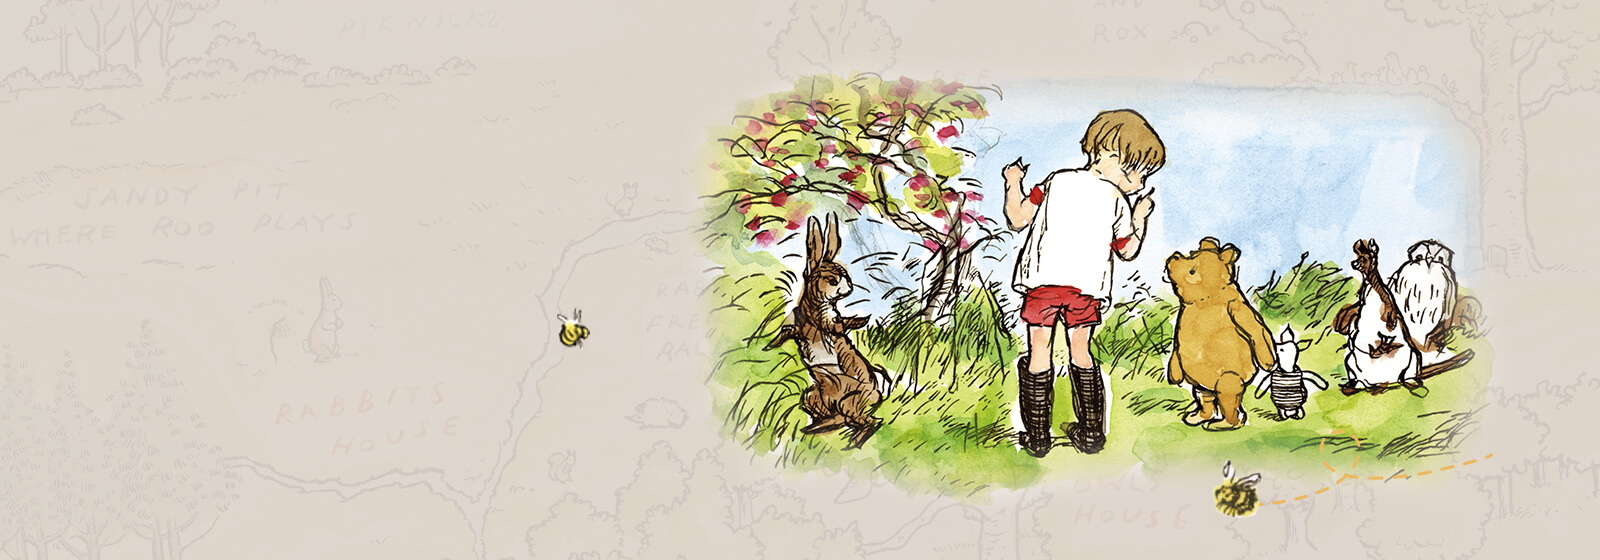 Learn More About Winnie the Pooh and Friends